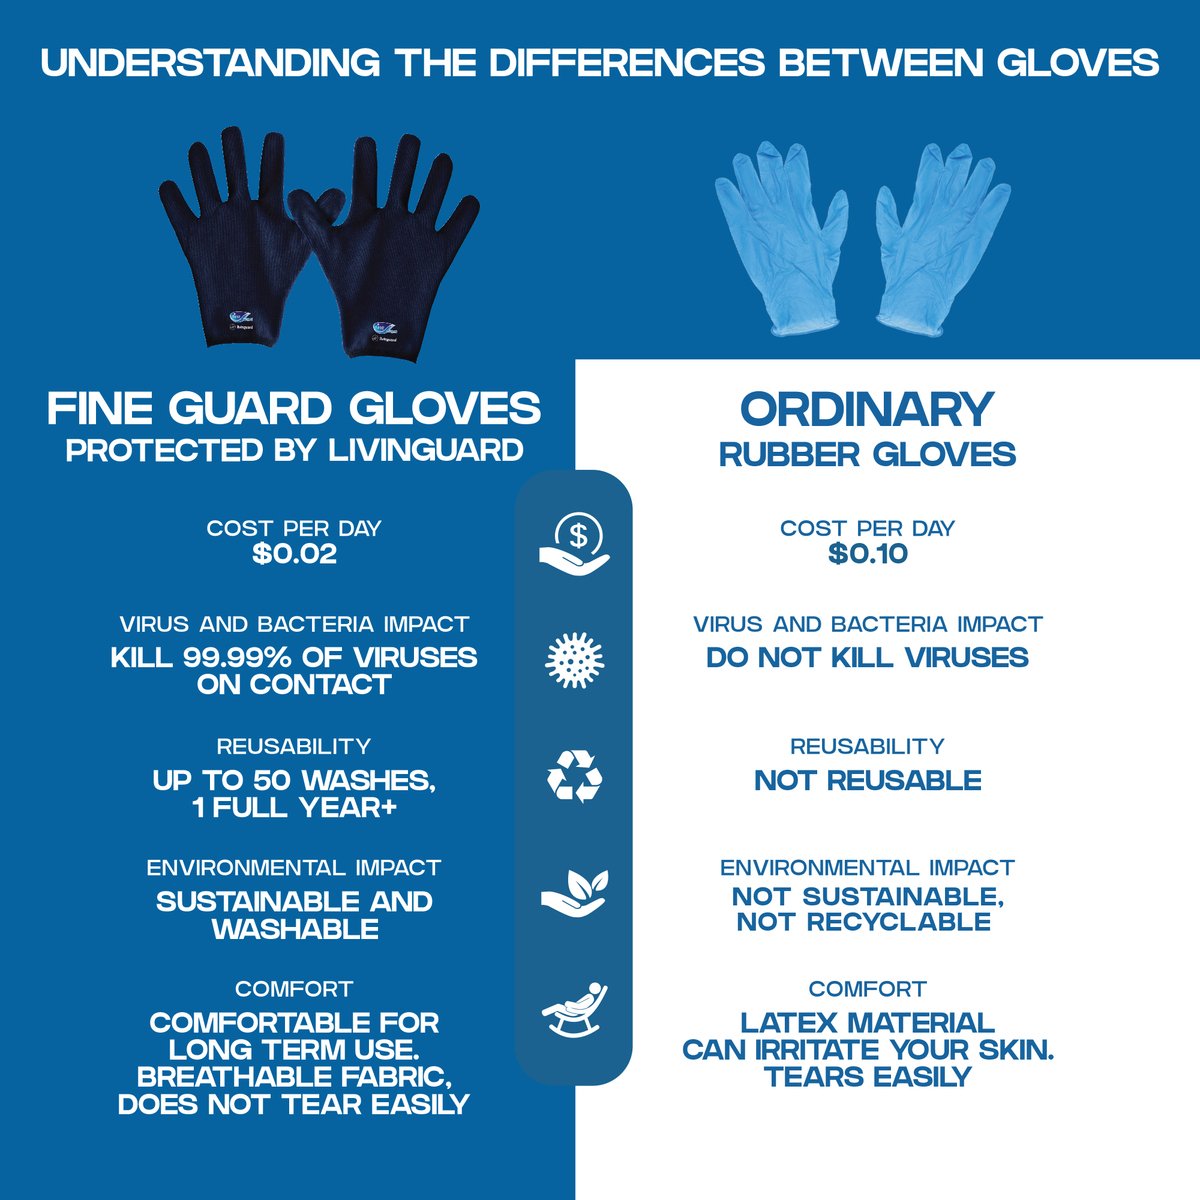 Fine Guard Reusable Protective Gloves Large 1 Pair